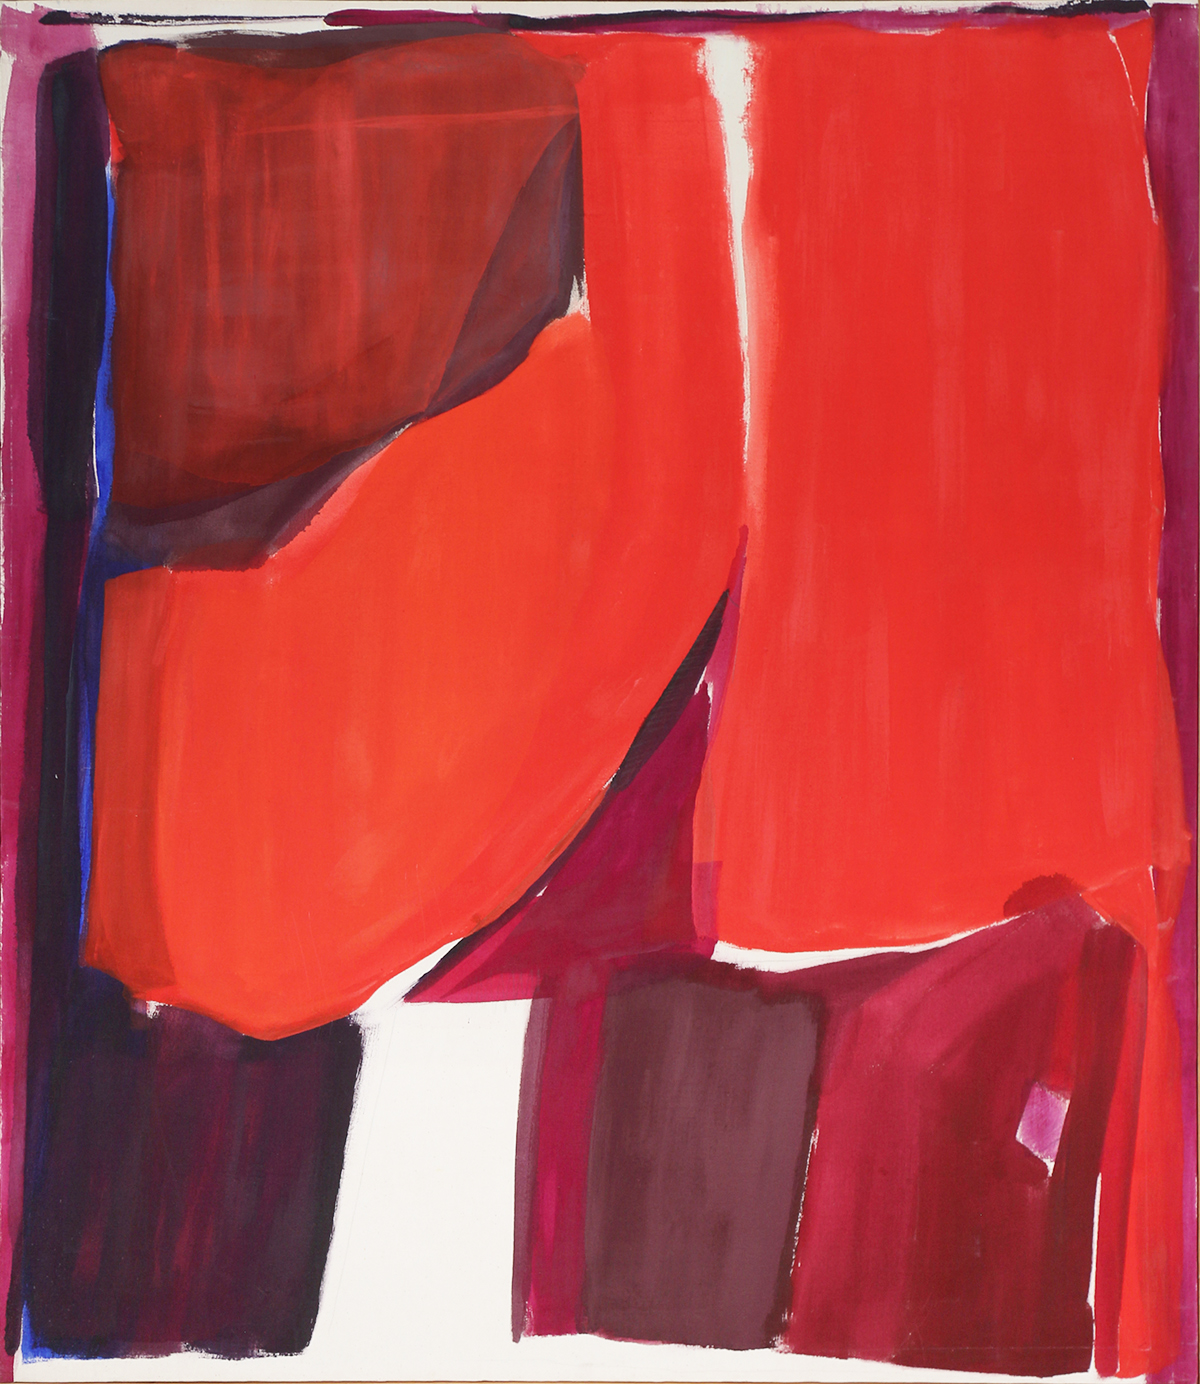 Study in Red, c. 1976